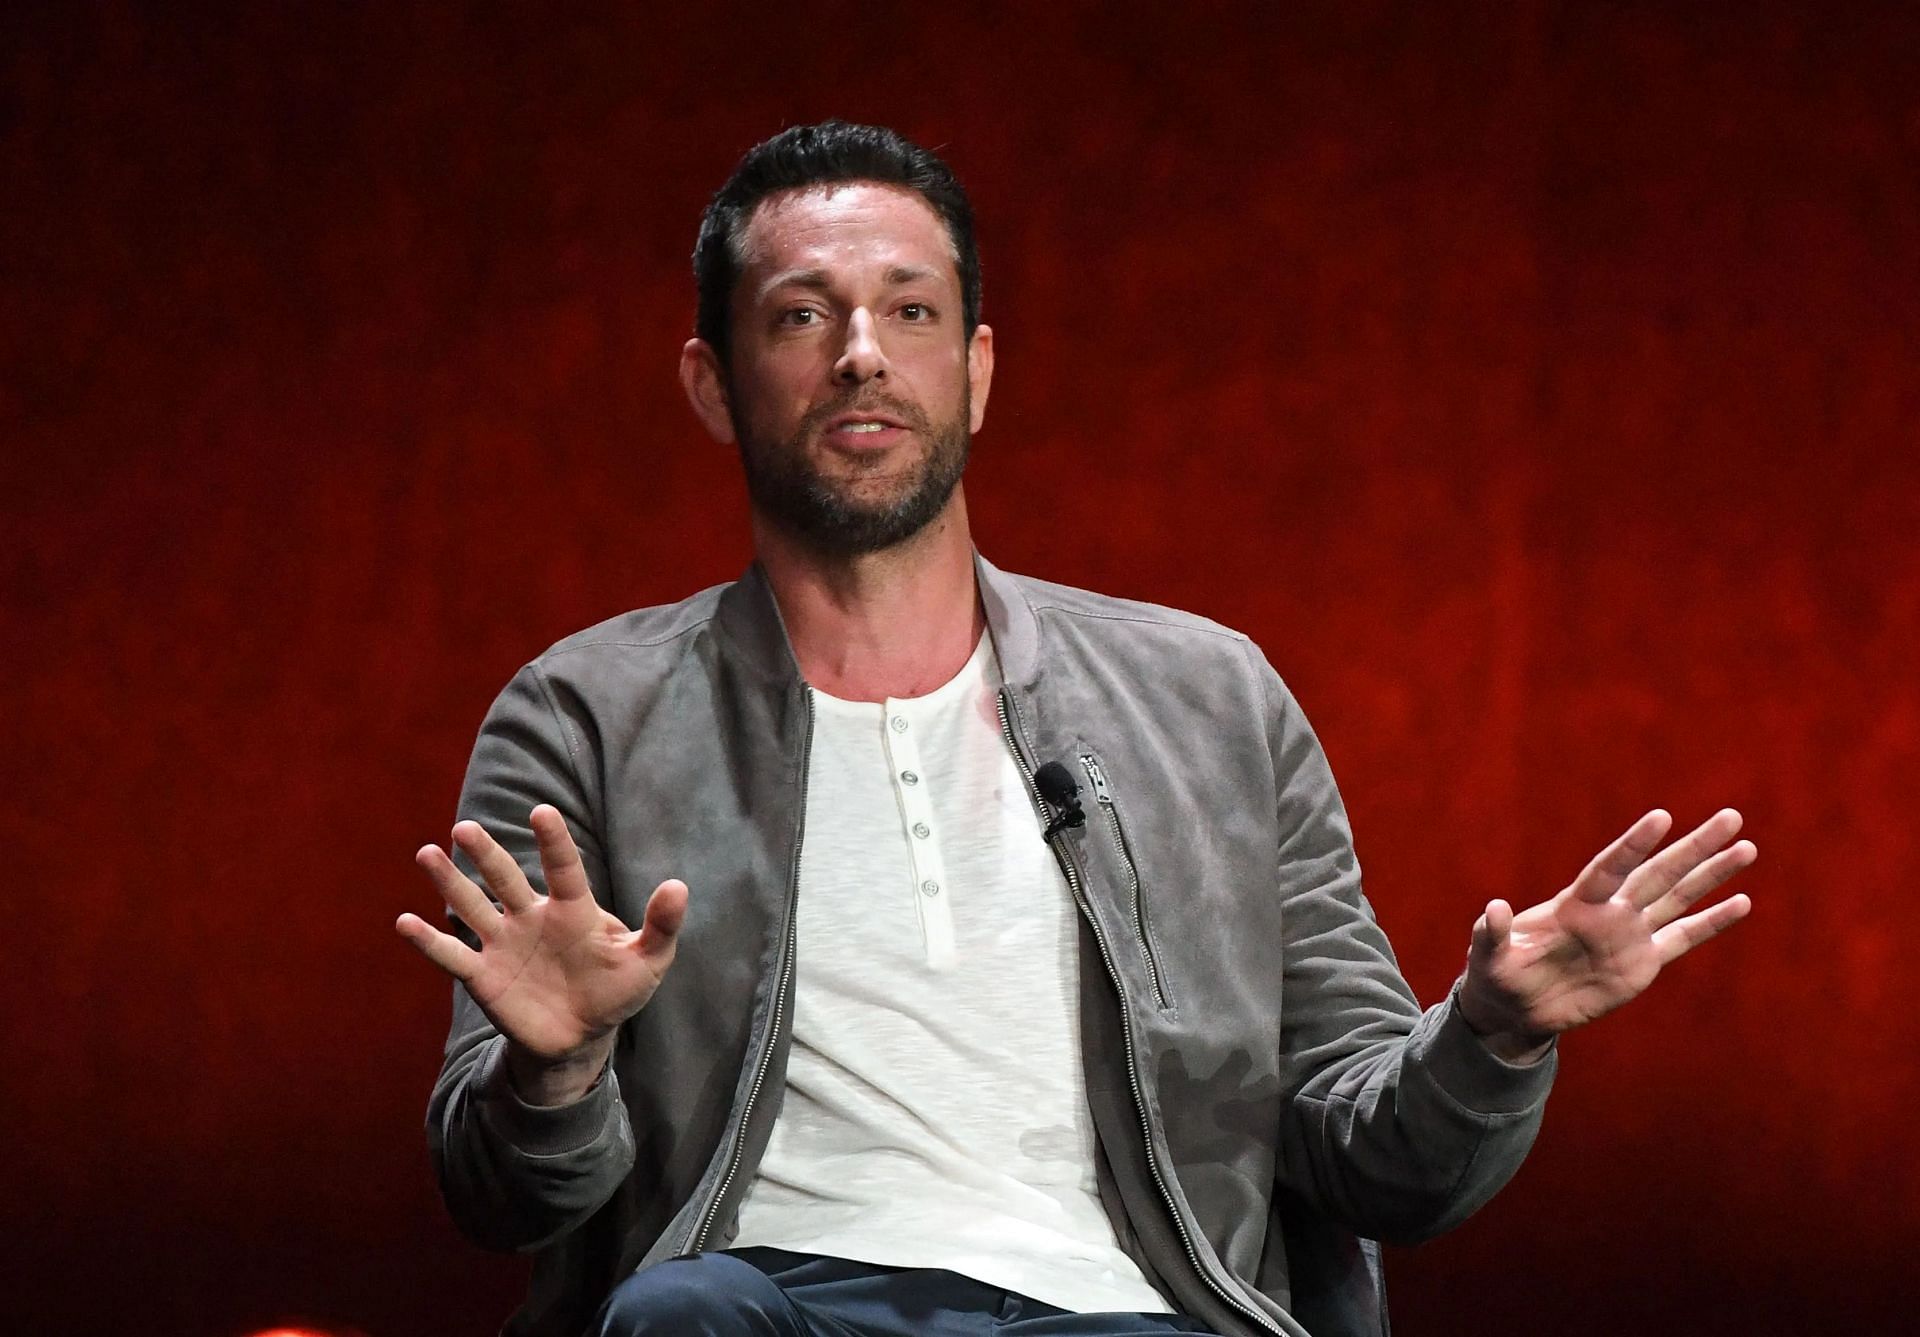 Shazam actor Zachary Levi discussing his book Radical Love (Image via Valerie Macon, Getty Images)